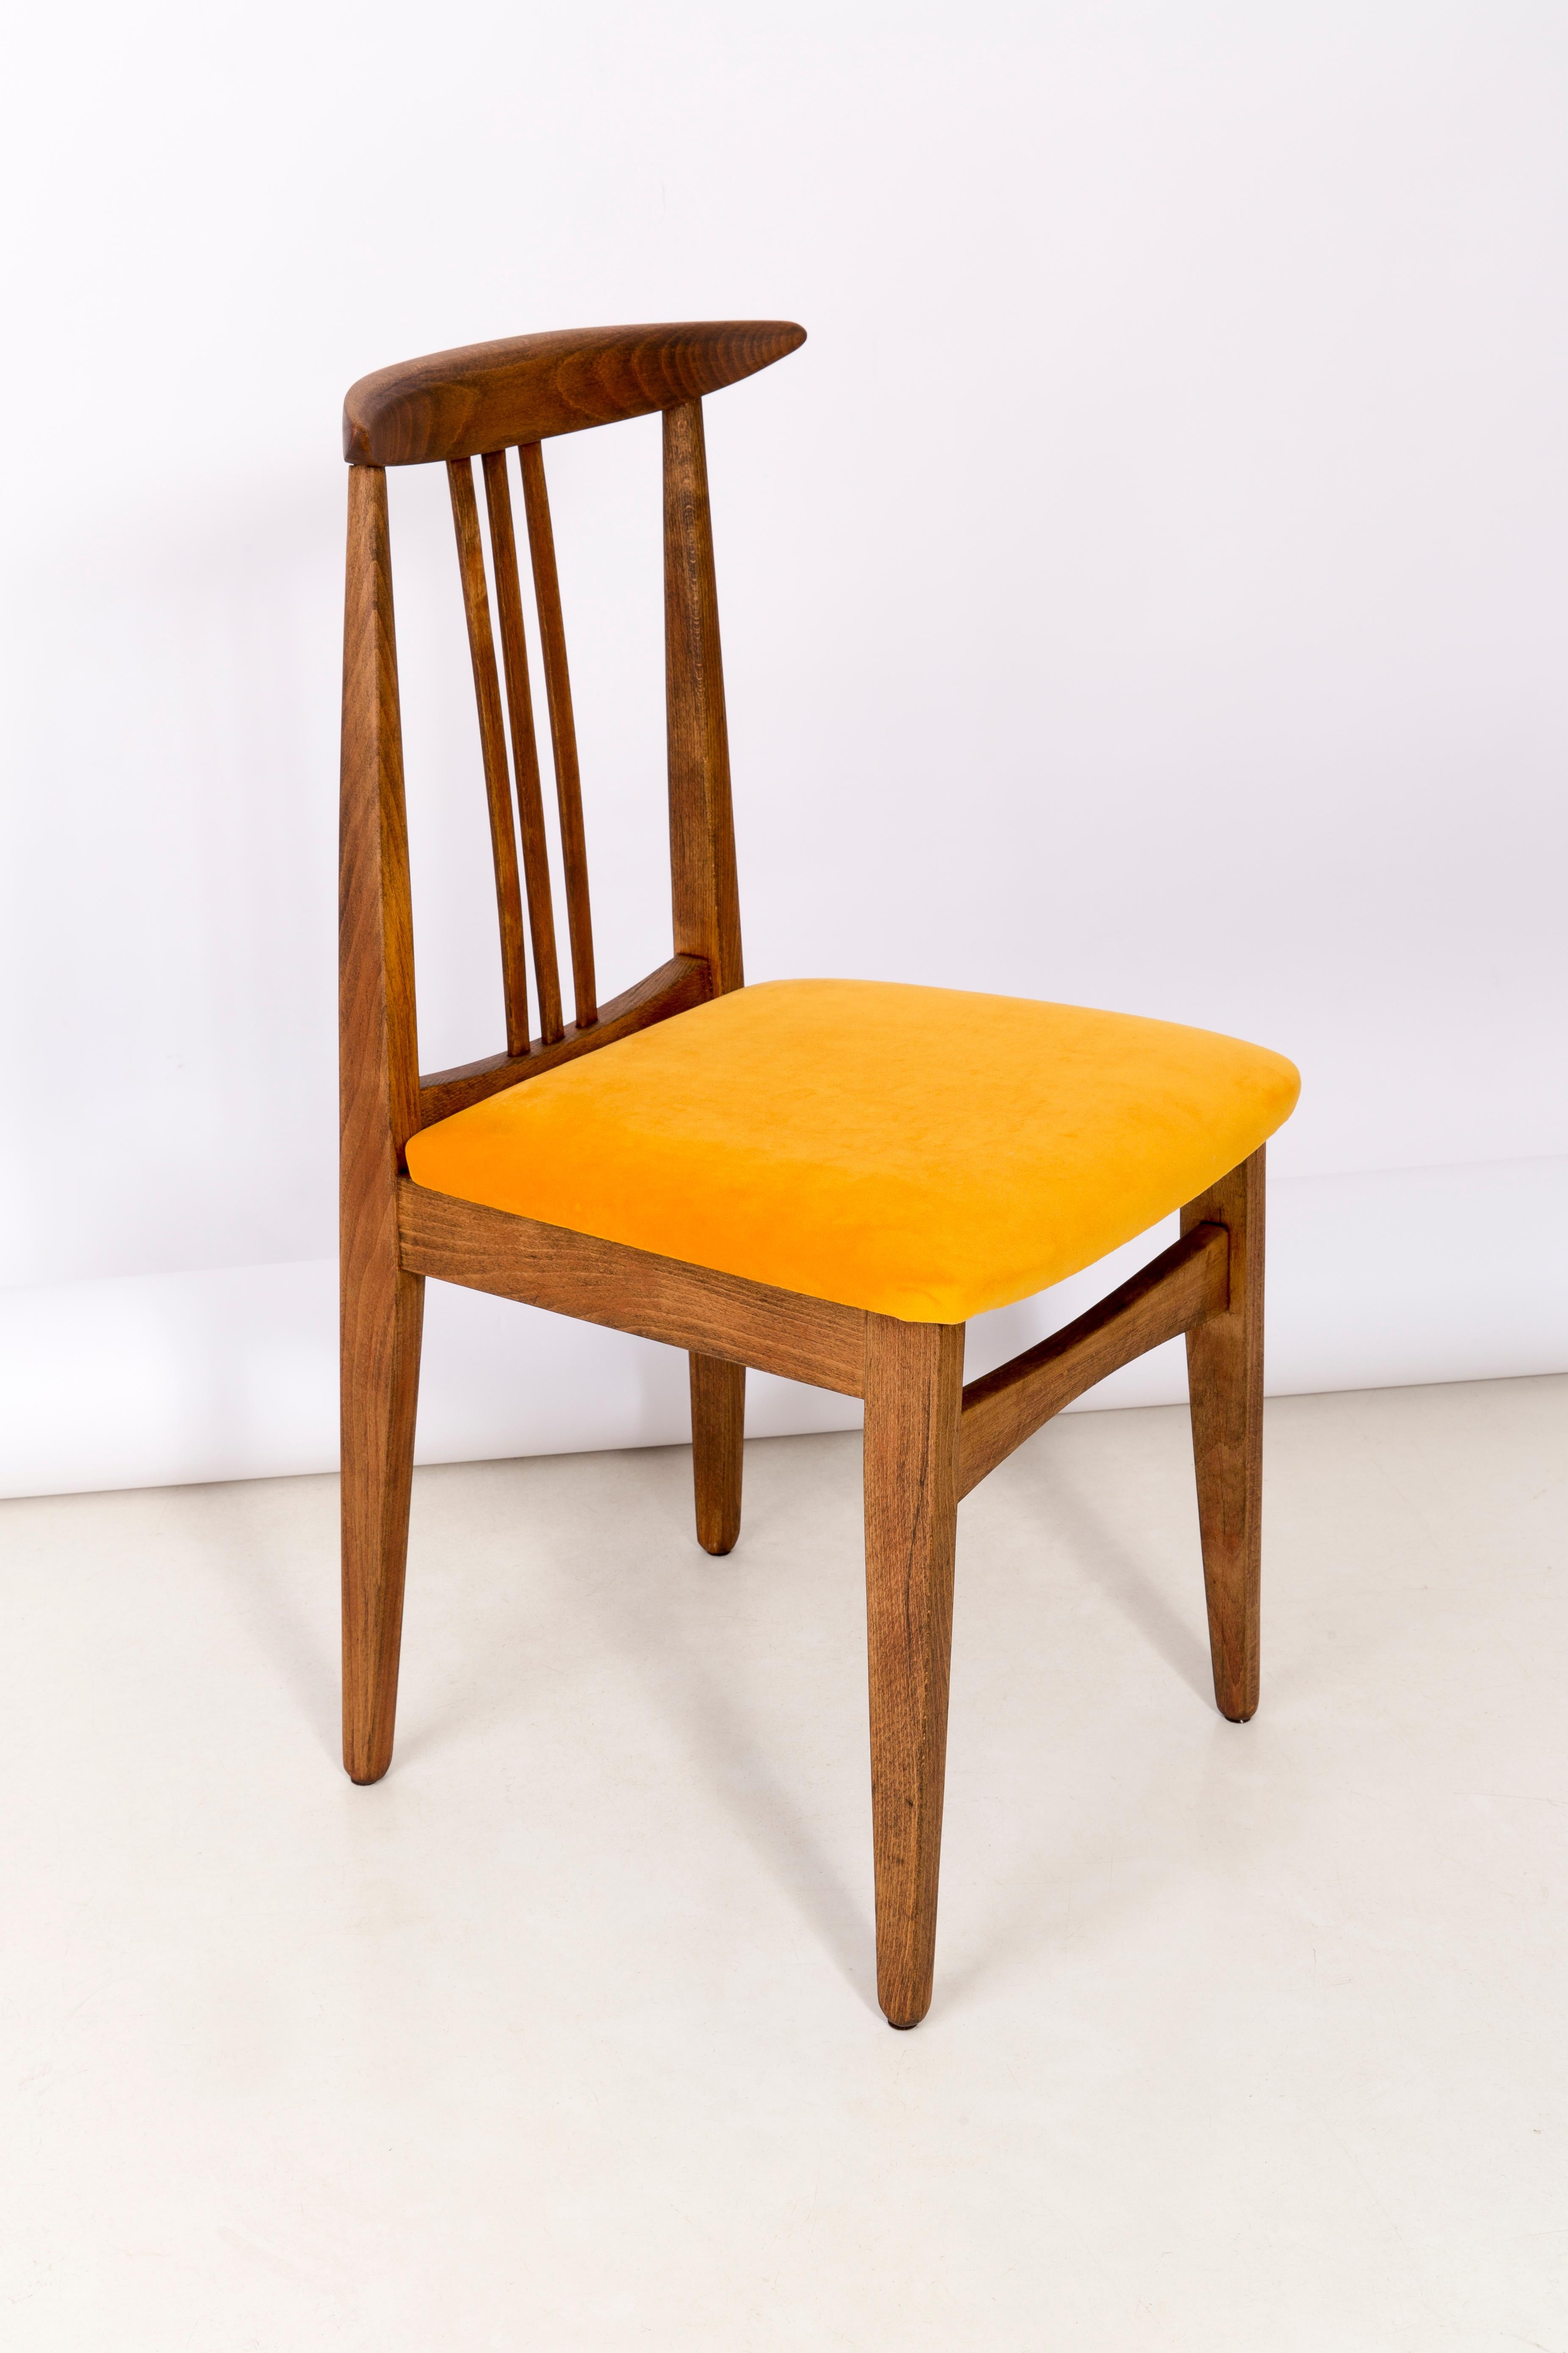 Hand-Crafted Set of Two Yellow Chairs, by Zielinski, Poland, 1960s For Sale